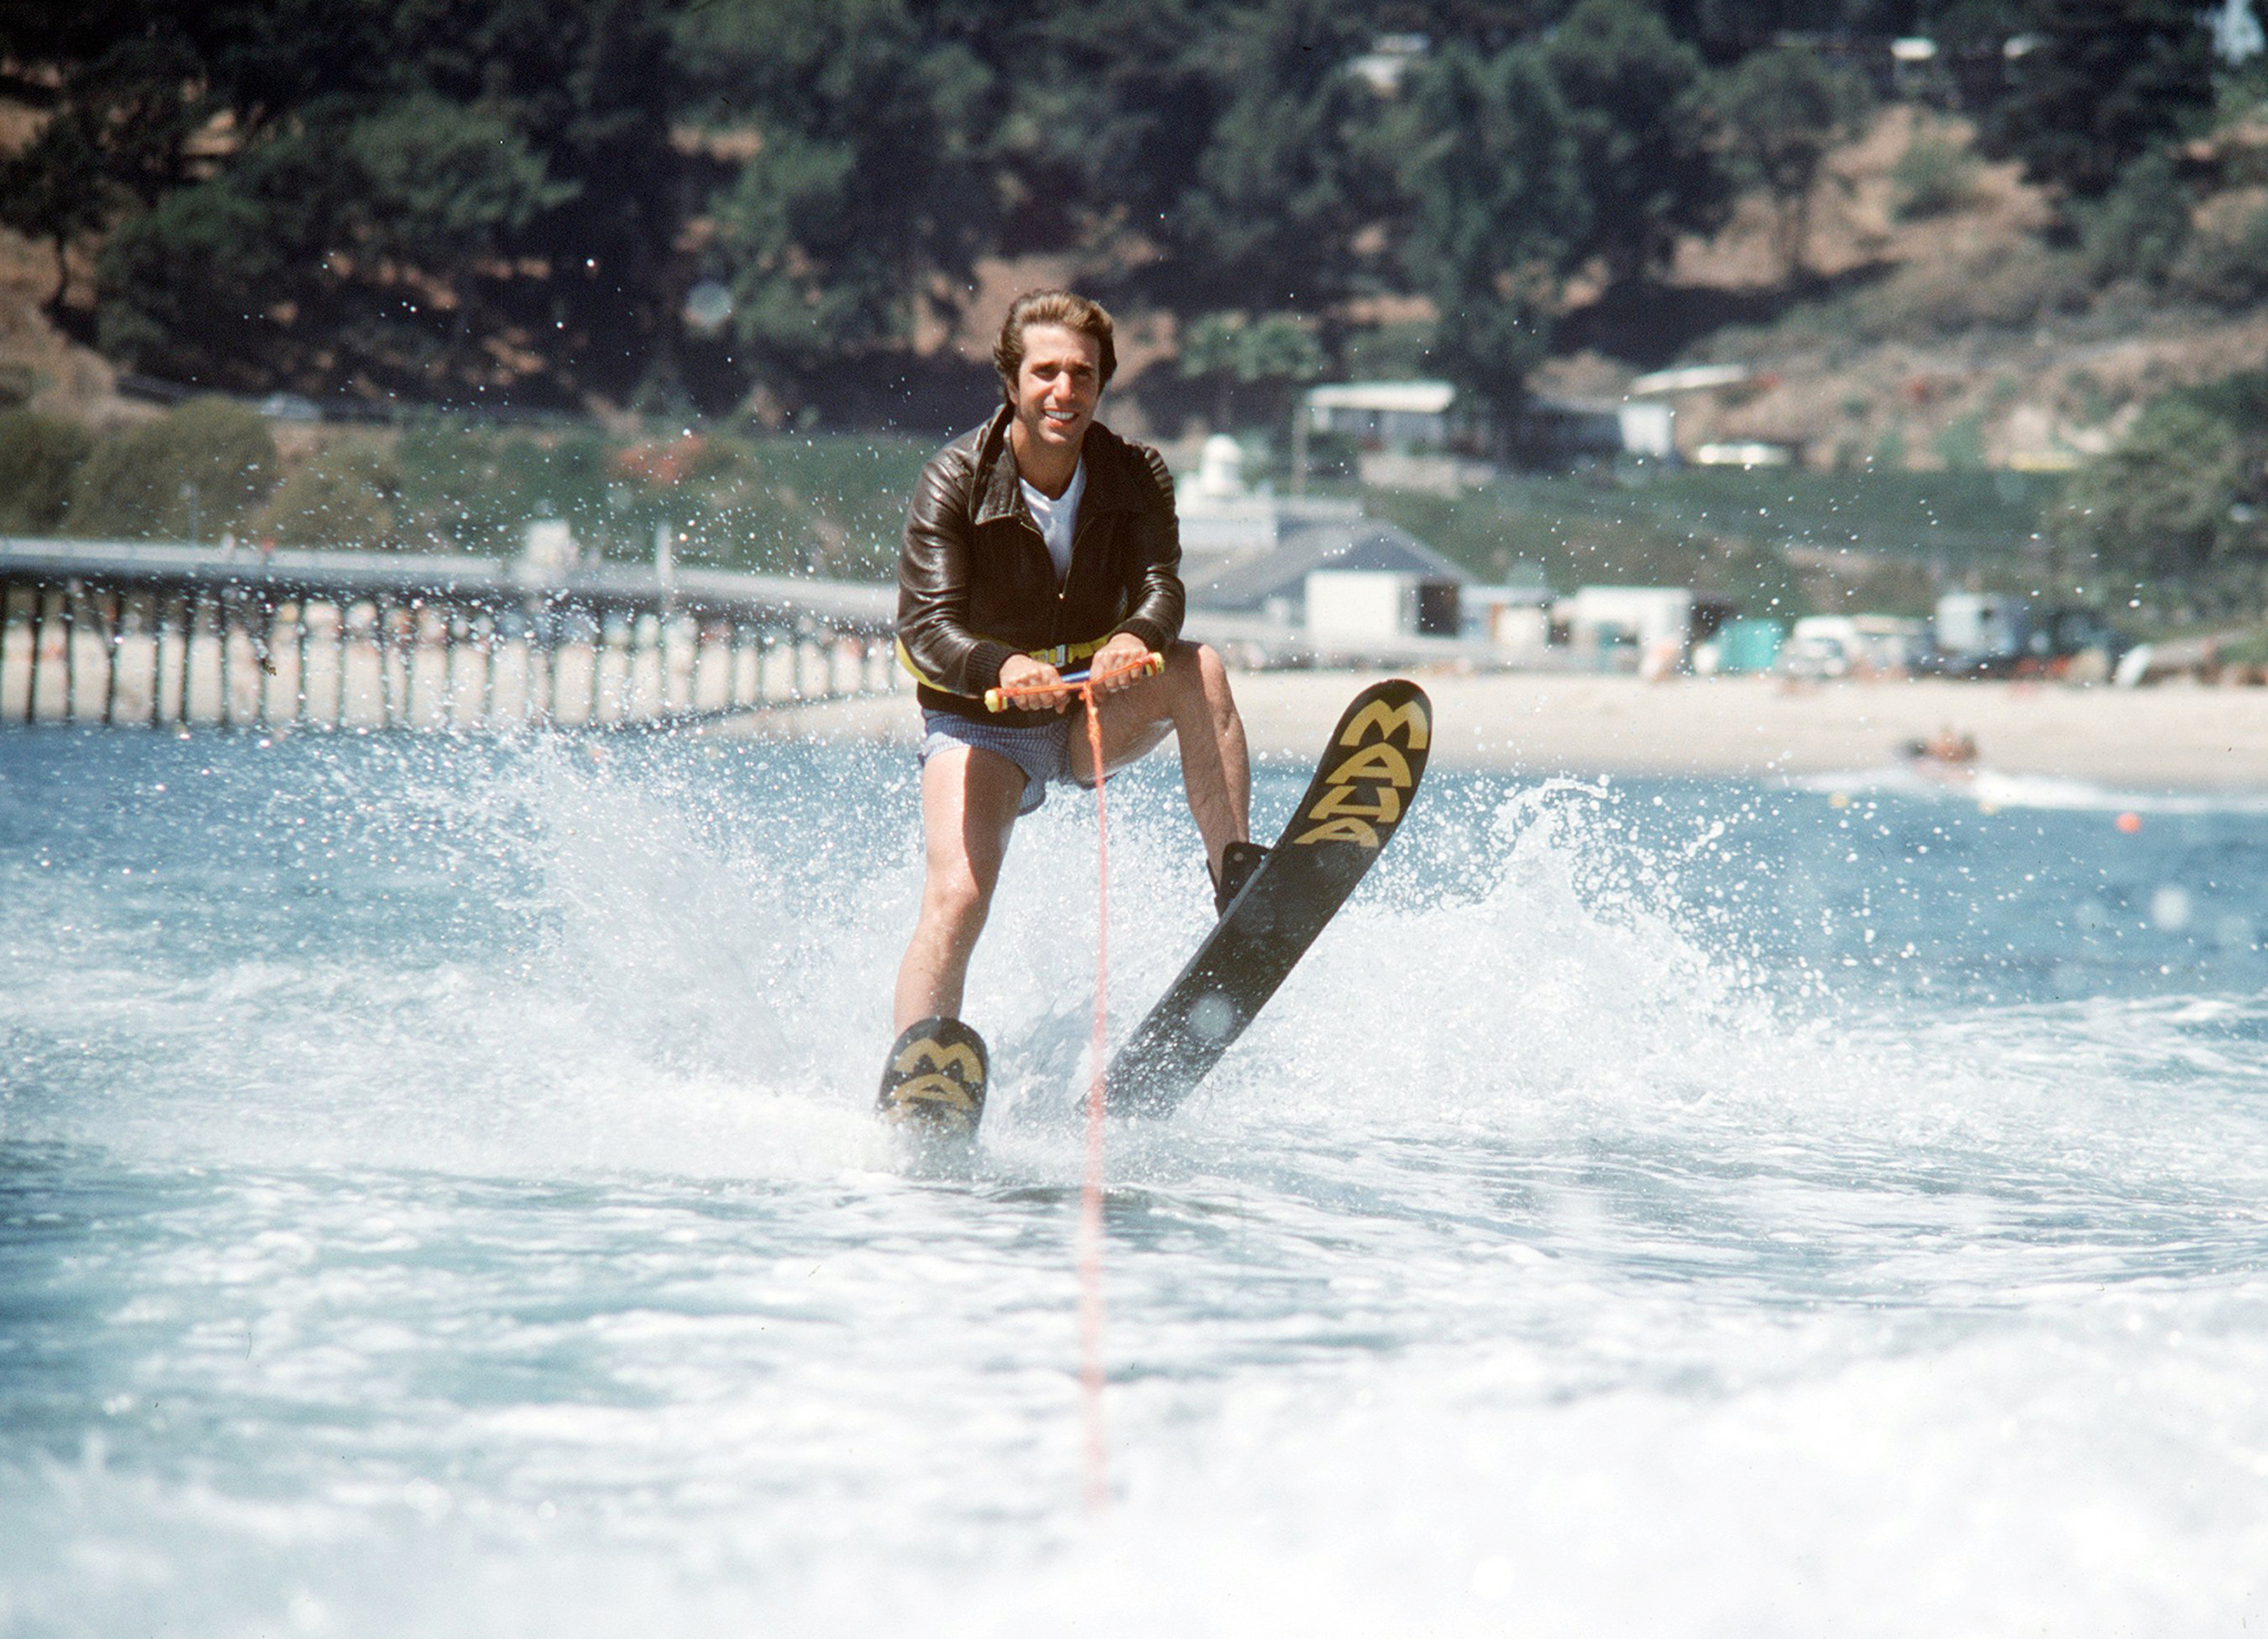 <p>It’s hard to think of a more infamous moment in TV history than the one that gave birth to the term “jumping the shark.” Though a beloved sitcom for much of its run, <span><em>Happy Days</em> </span>started to run out of ideas as it went on. In the fifth season, it went completely off the rails when Fonzie, arguably one of the coolest characters ever appearing on the small screen, water-skied over a shark. This has come to be understood as the moment when the show demonstrated a lack of good storytelling ideas, though it would actually continue for several more seasons. </p><p><a href='https://www.msn.com/en-us/community/channel/vid-cj9pqbr0vn9in2b6ddcd8sfgpfq6x6utp44fssrv6mc2gtybw0us'>Did you enjoy this slideshow? Follow us on MSN to see more of our exclusive entertainment content.</a></p>